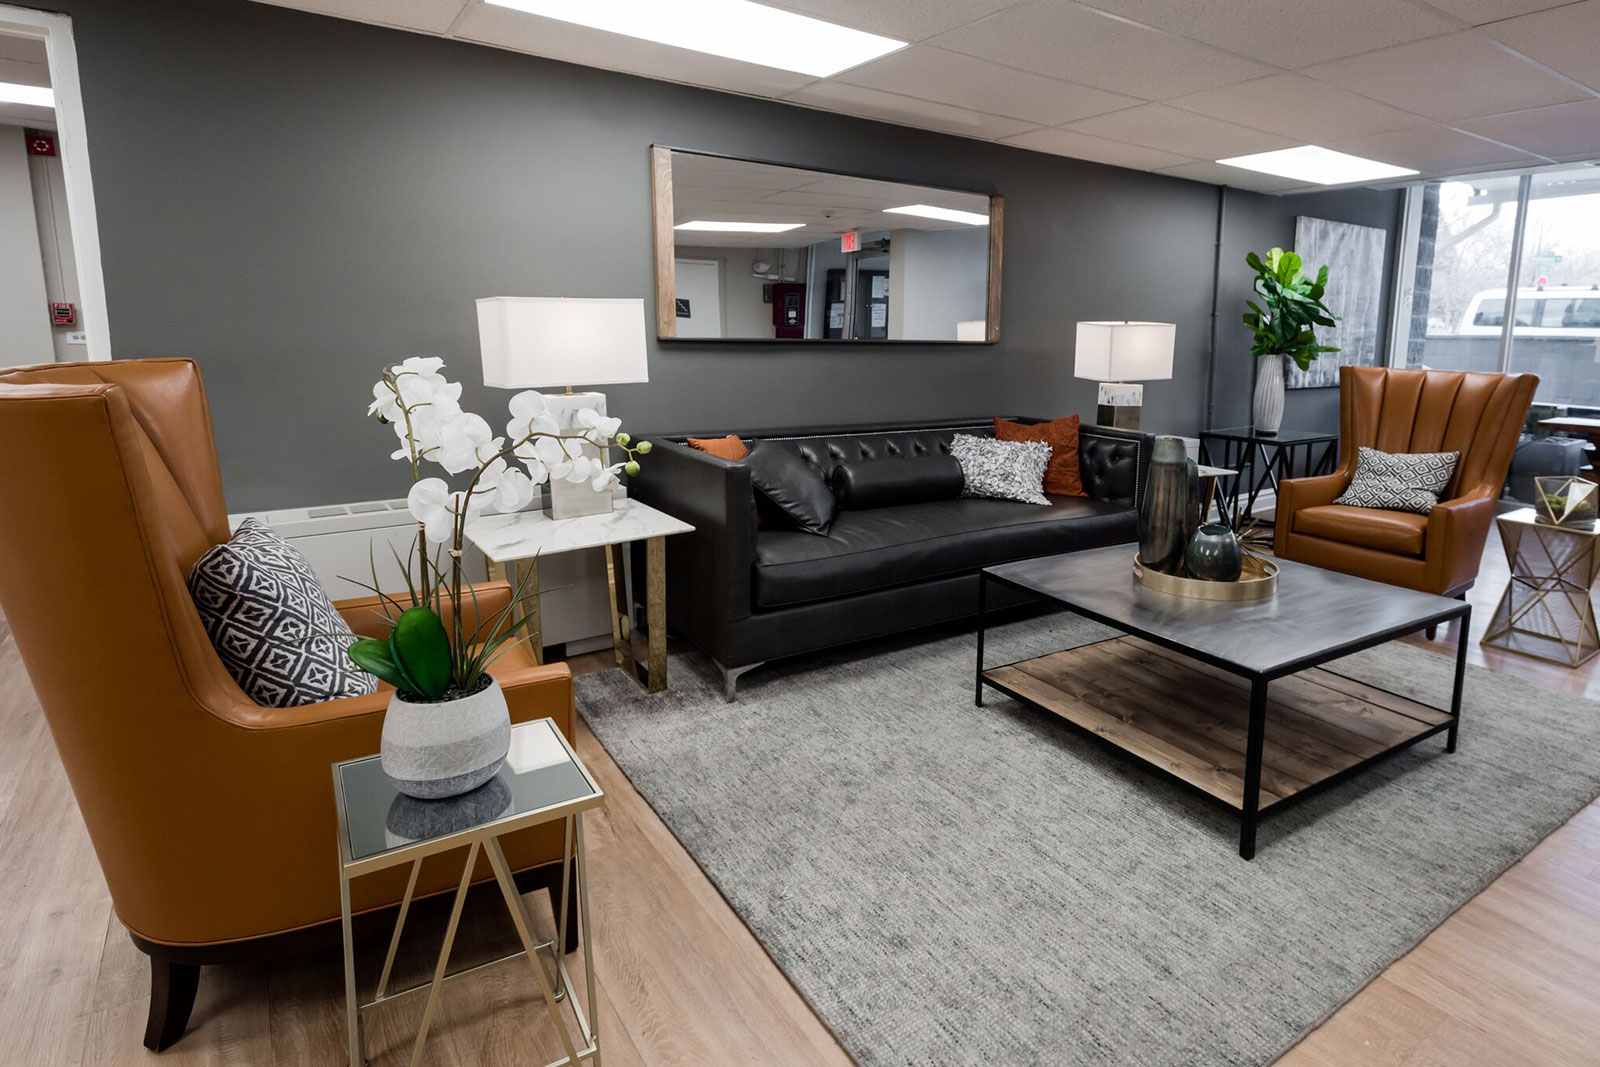 Wood flooring, a grey rug, a black couch, two brown chairs, a grey and black coffee table, dark grey walls, and a big mirror